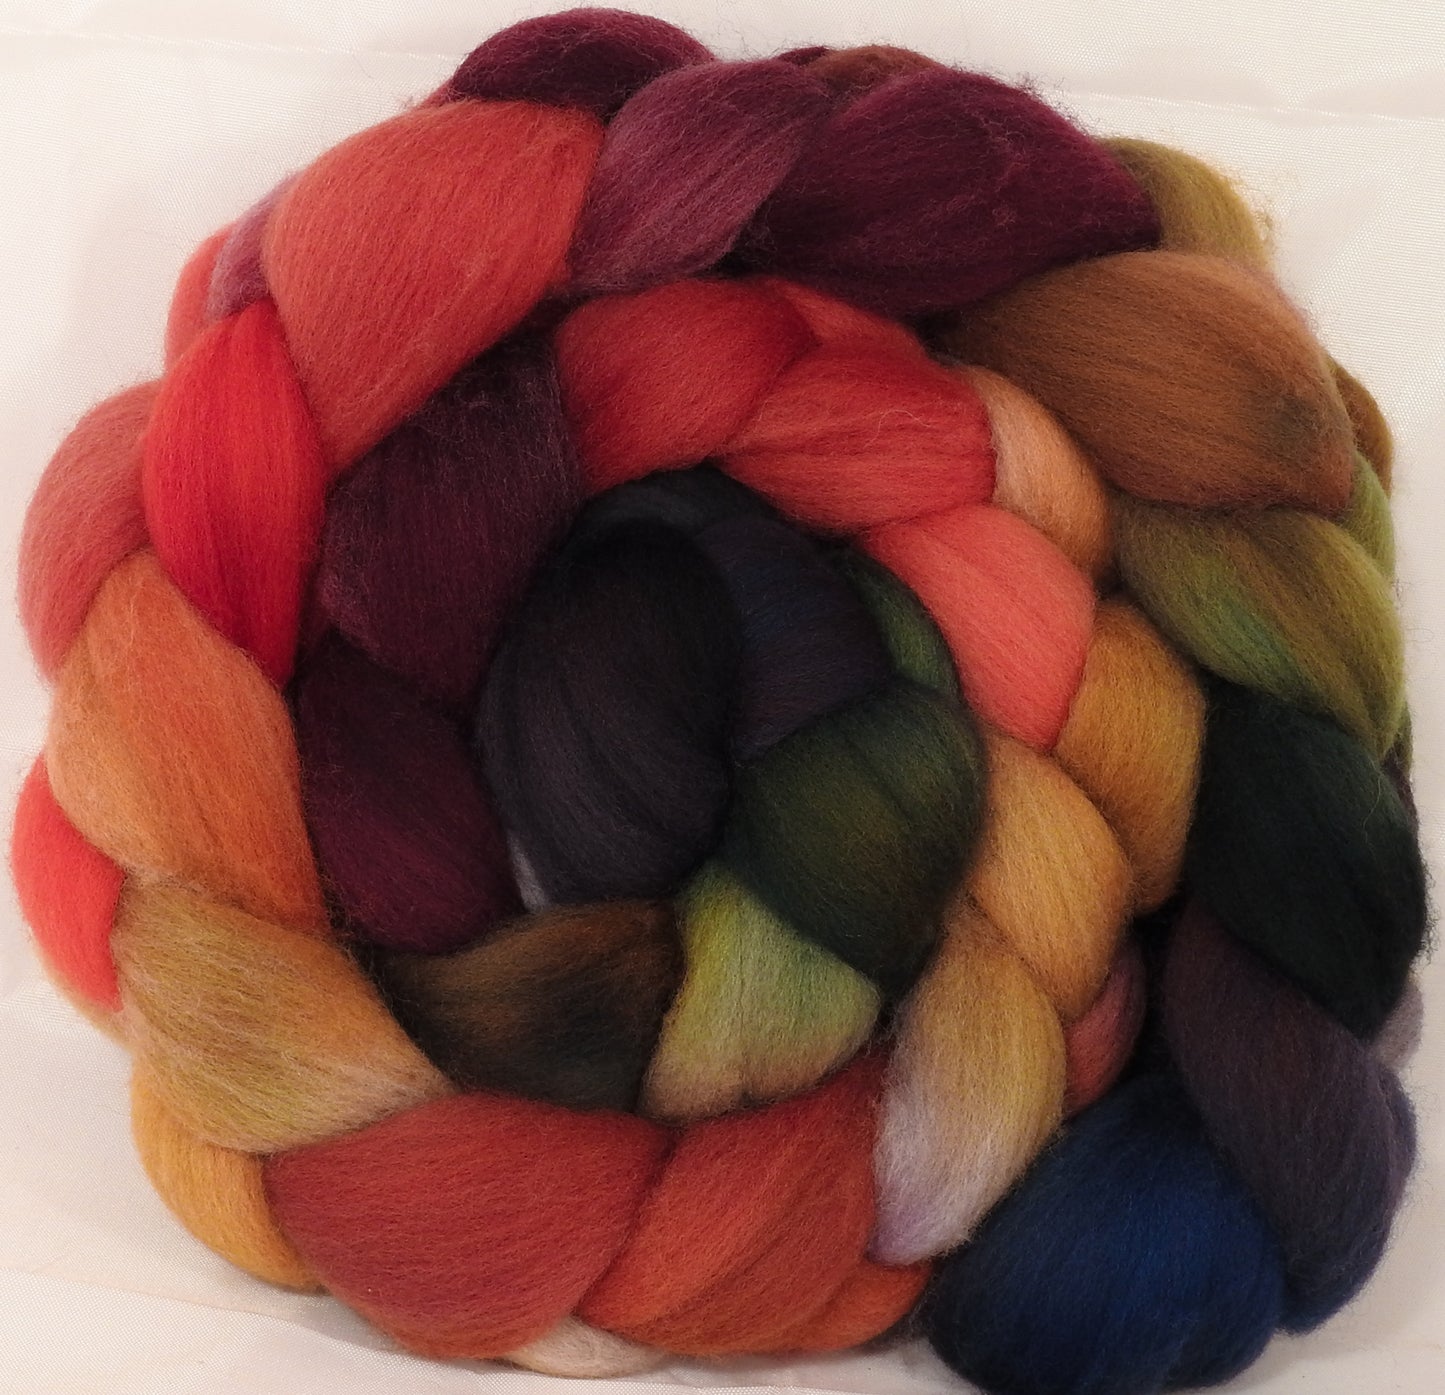 Hand dyed top for spinning -Poinsettia-Organic Polwarth - Inglenook Fibers